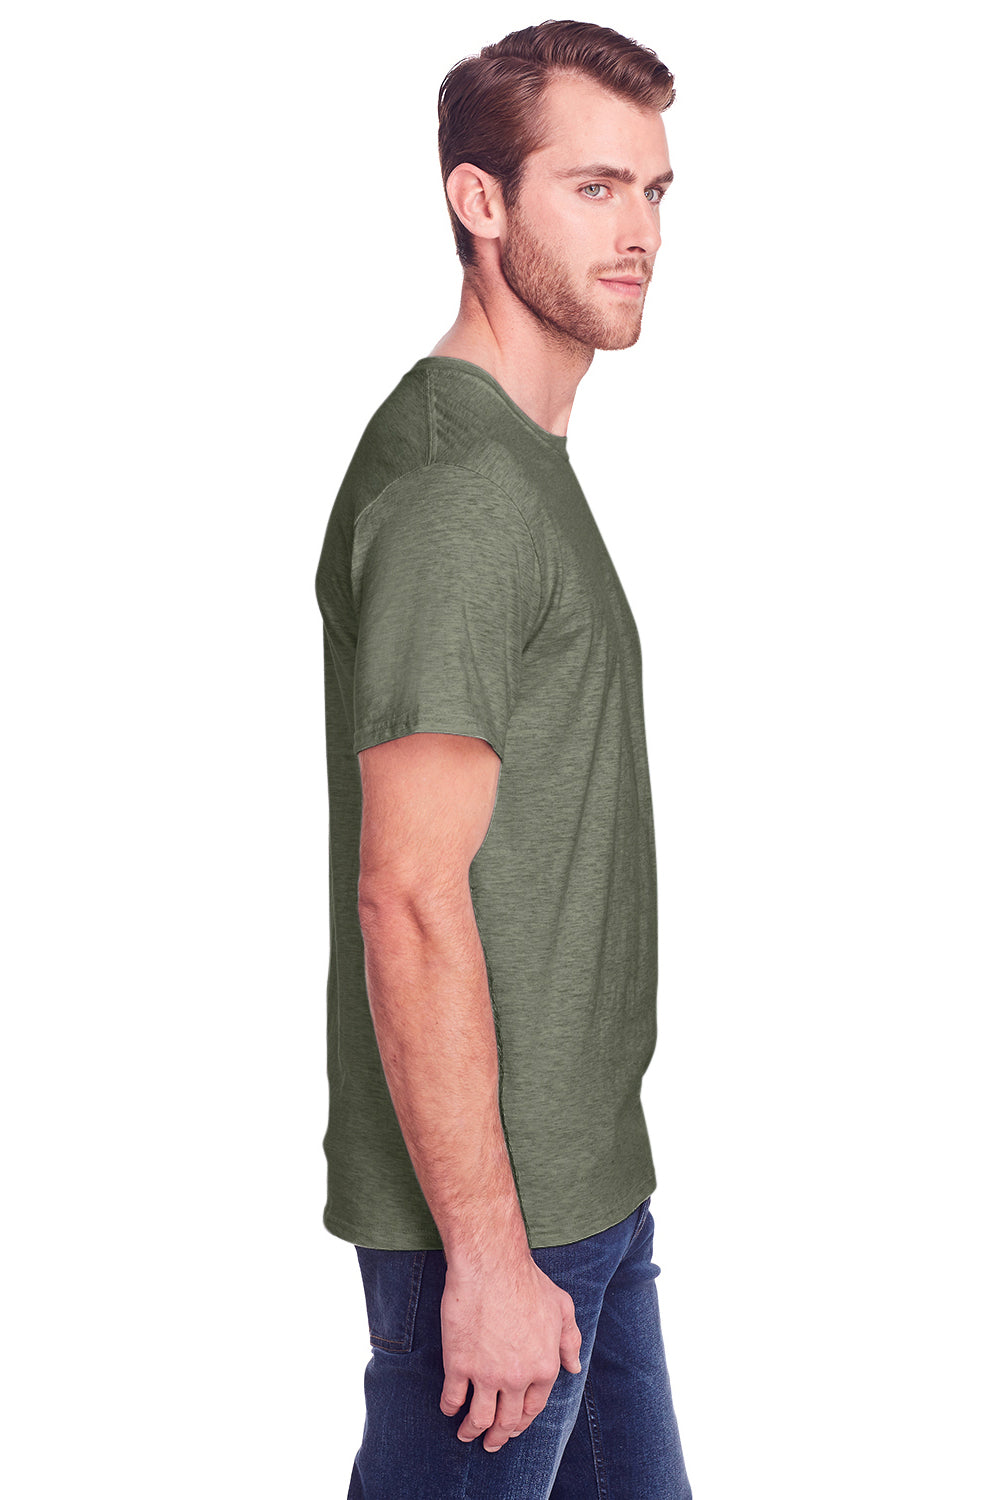 Fruit Of The Loom IC47MR Mens Iconic Short Sleeve Crewneck T-Shirt Heather Military Green Side